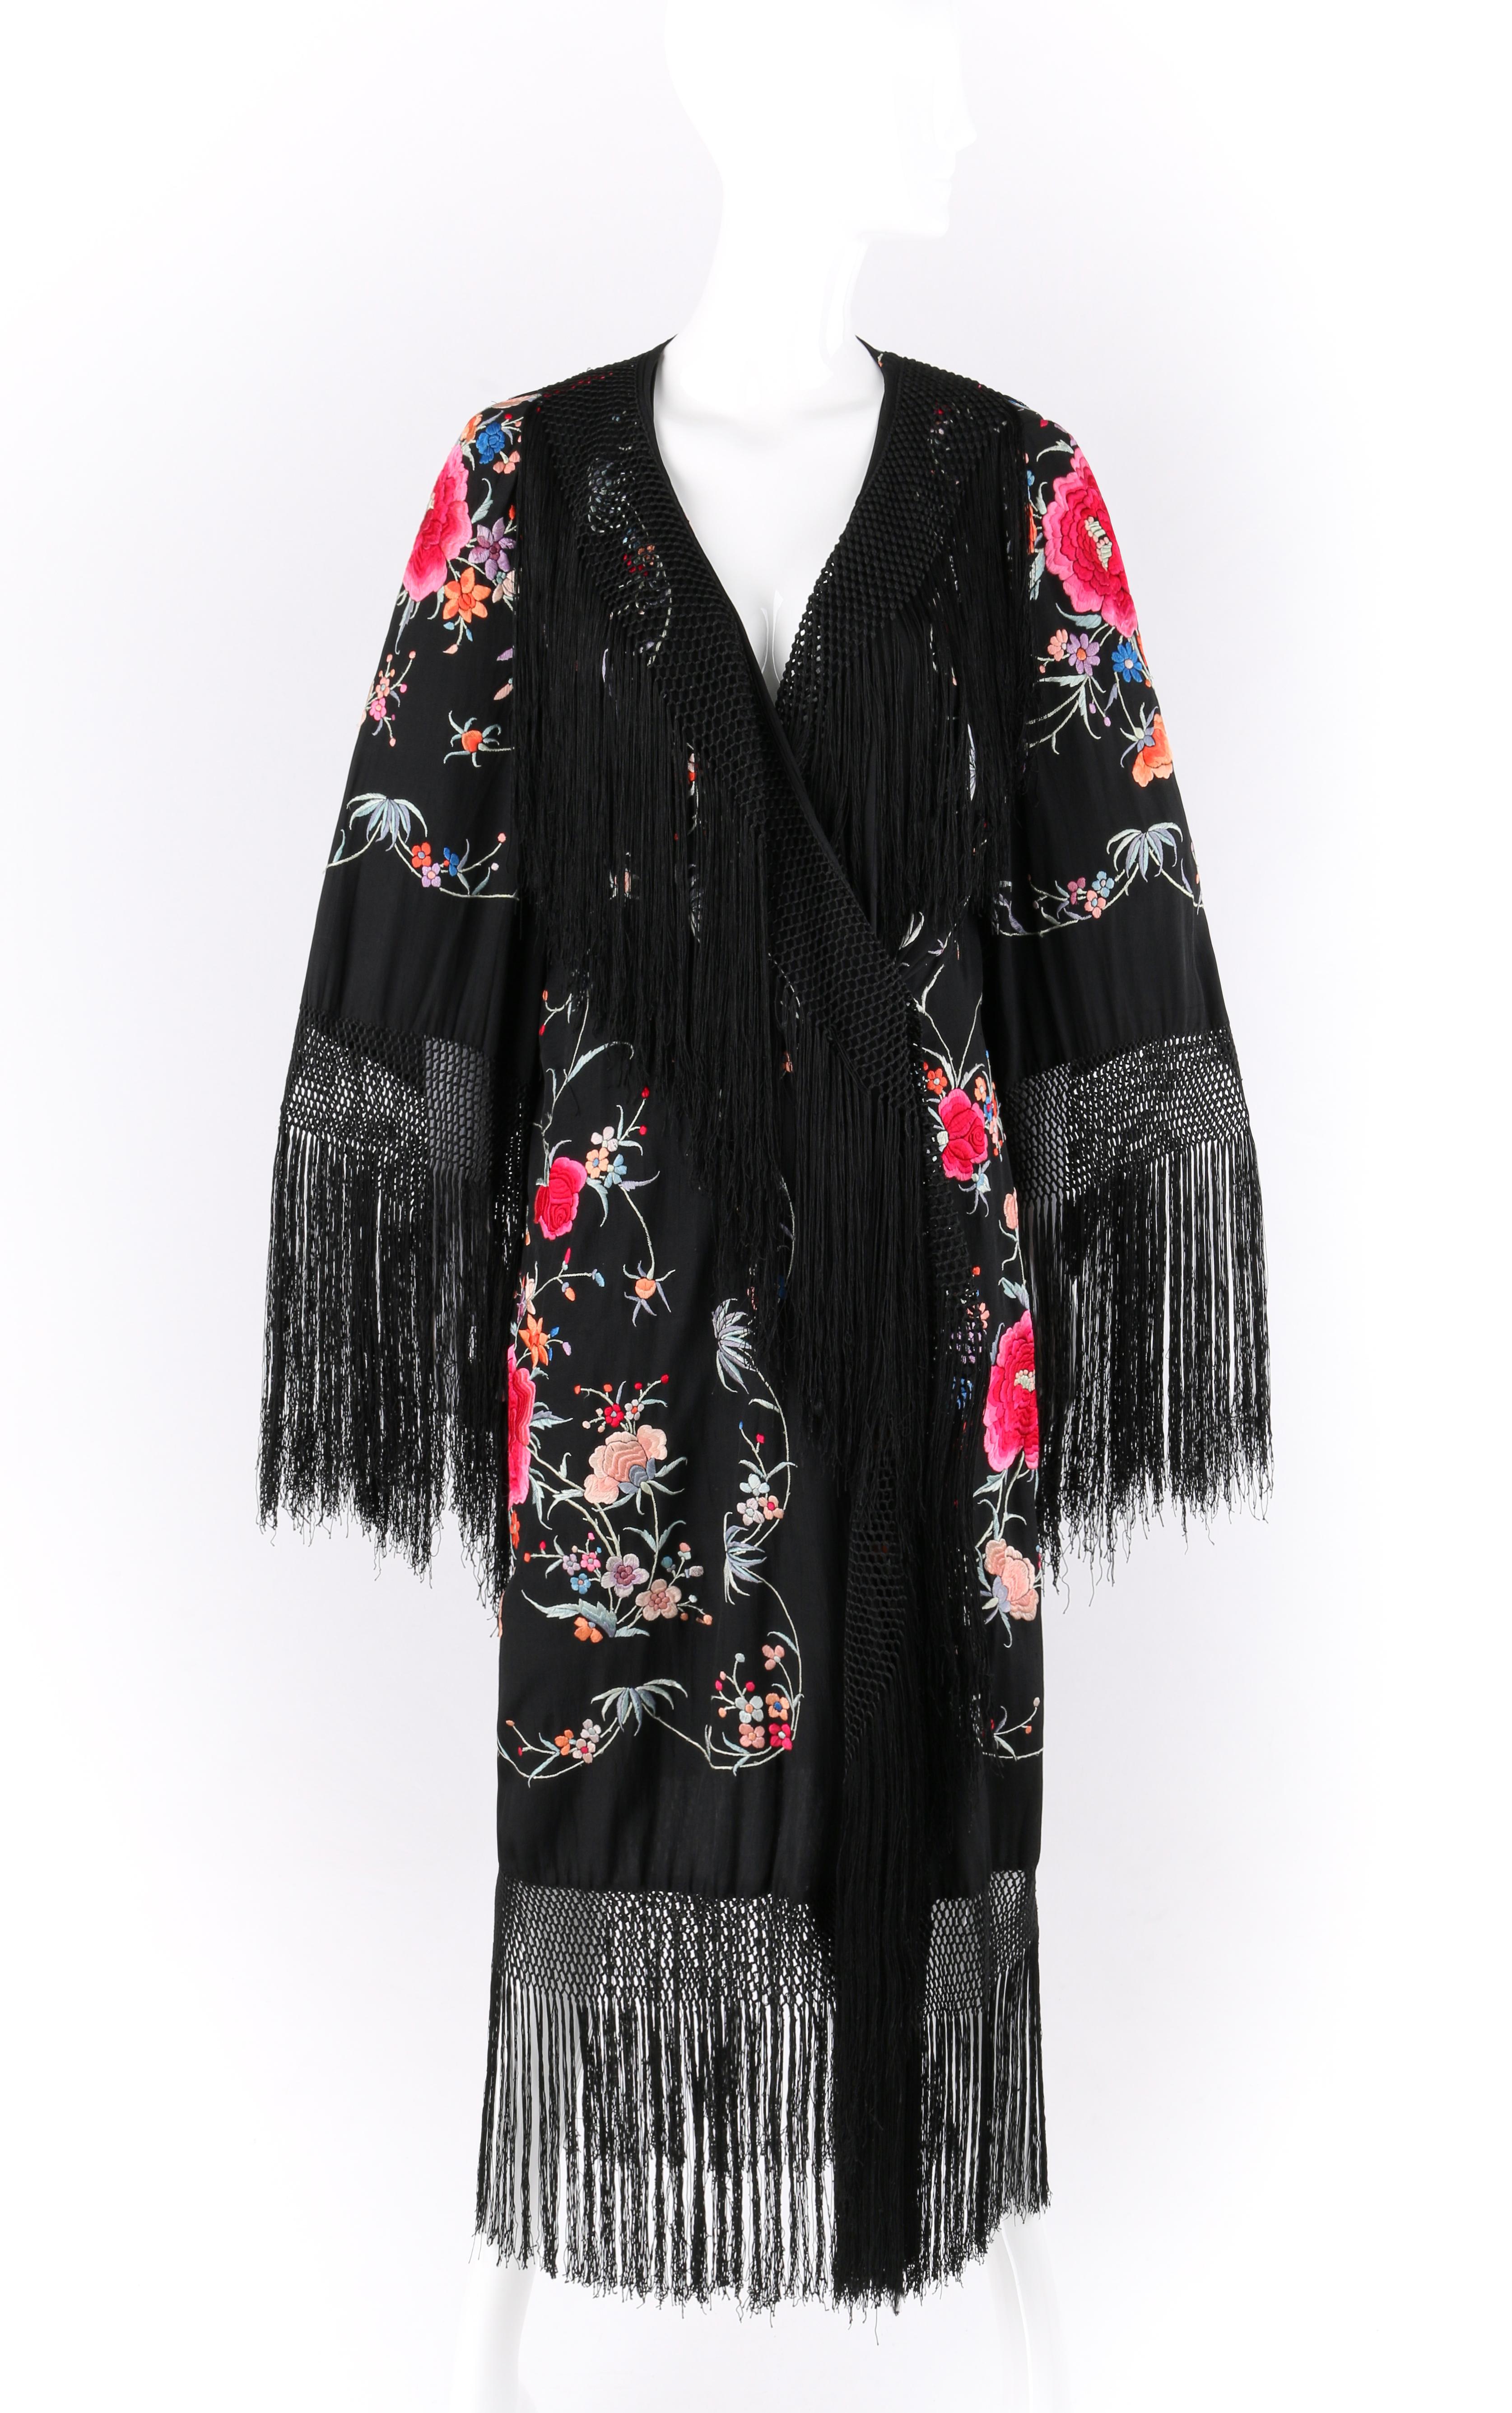 COUTURE c.1920’s Black Hand Embroidered Silk Oriental Floral Fringe Kimono Robe
Circa: 1920’s
Style: Kimono
Color(s): Black (base); shades of orange, pink, green, purple, and blue (detail)
Lined: No
Unmarked Fabric Content (feel of): Raw silk,